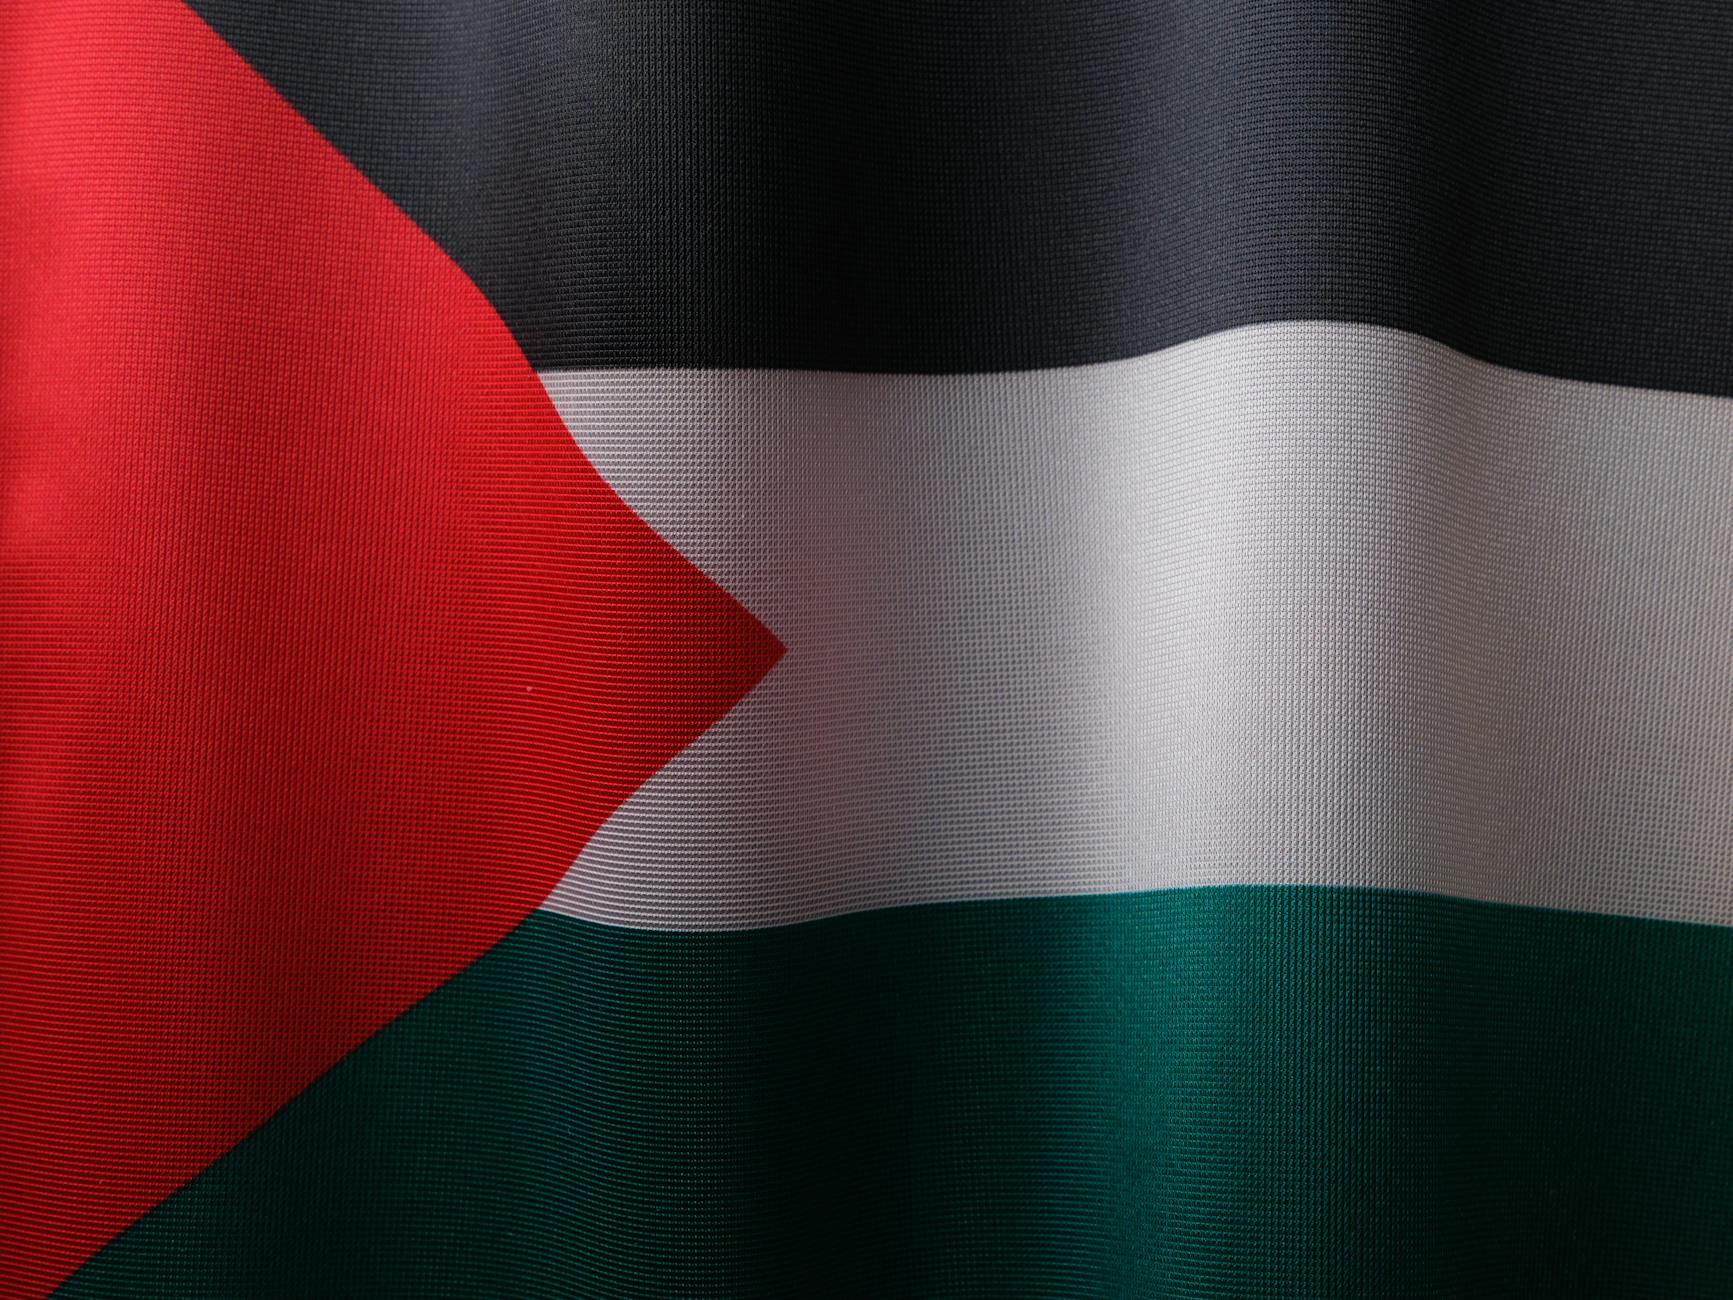 Good news for Palestinians in the U.S.